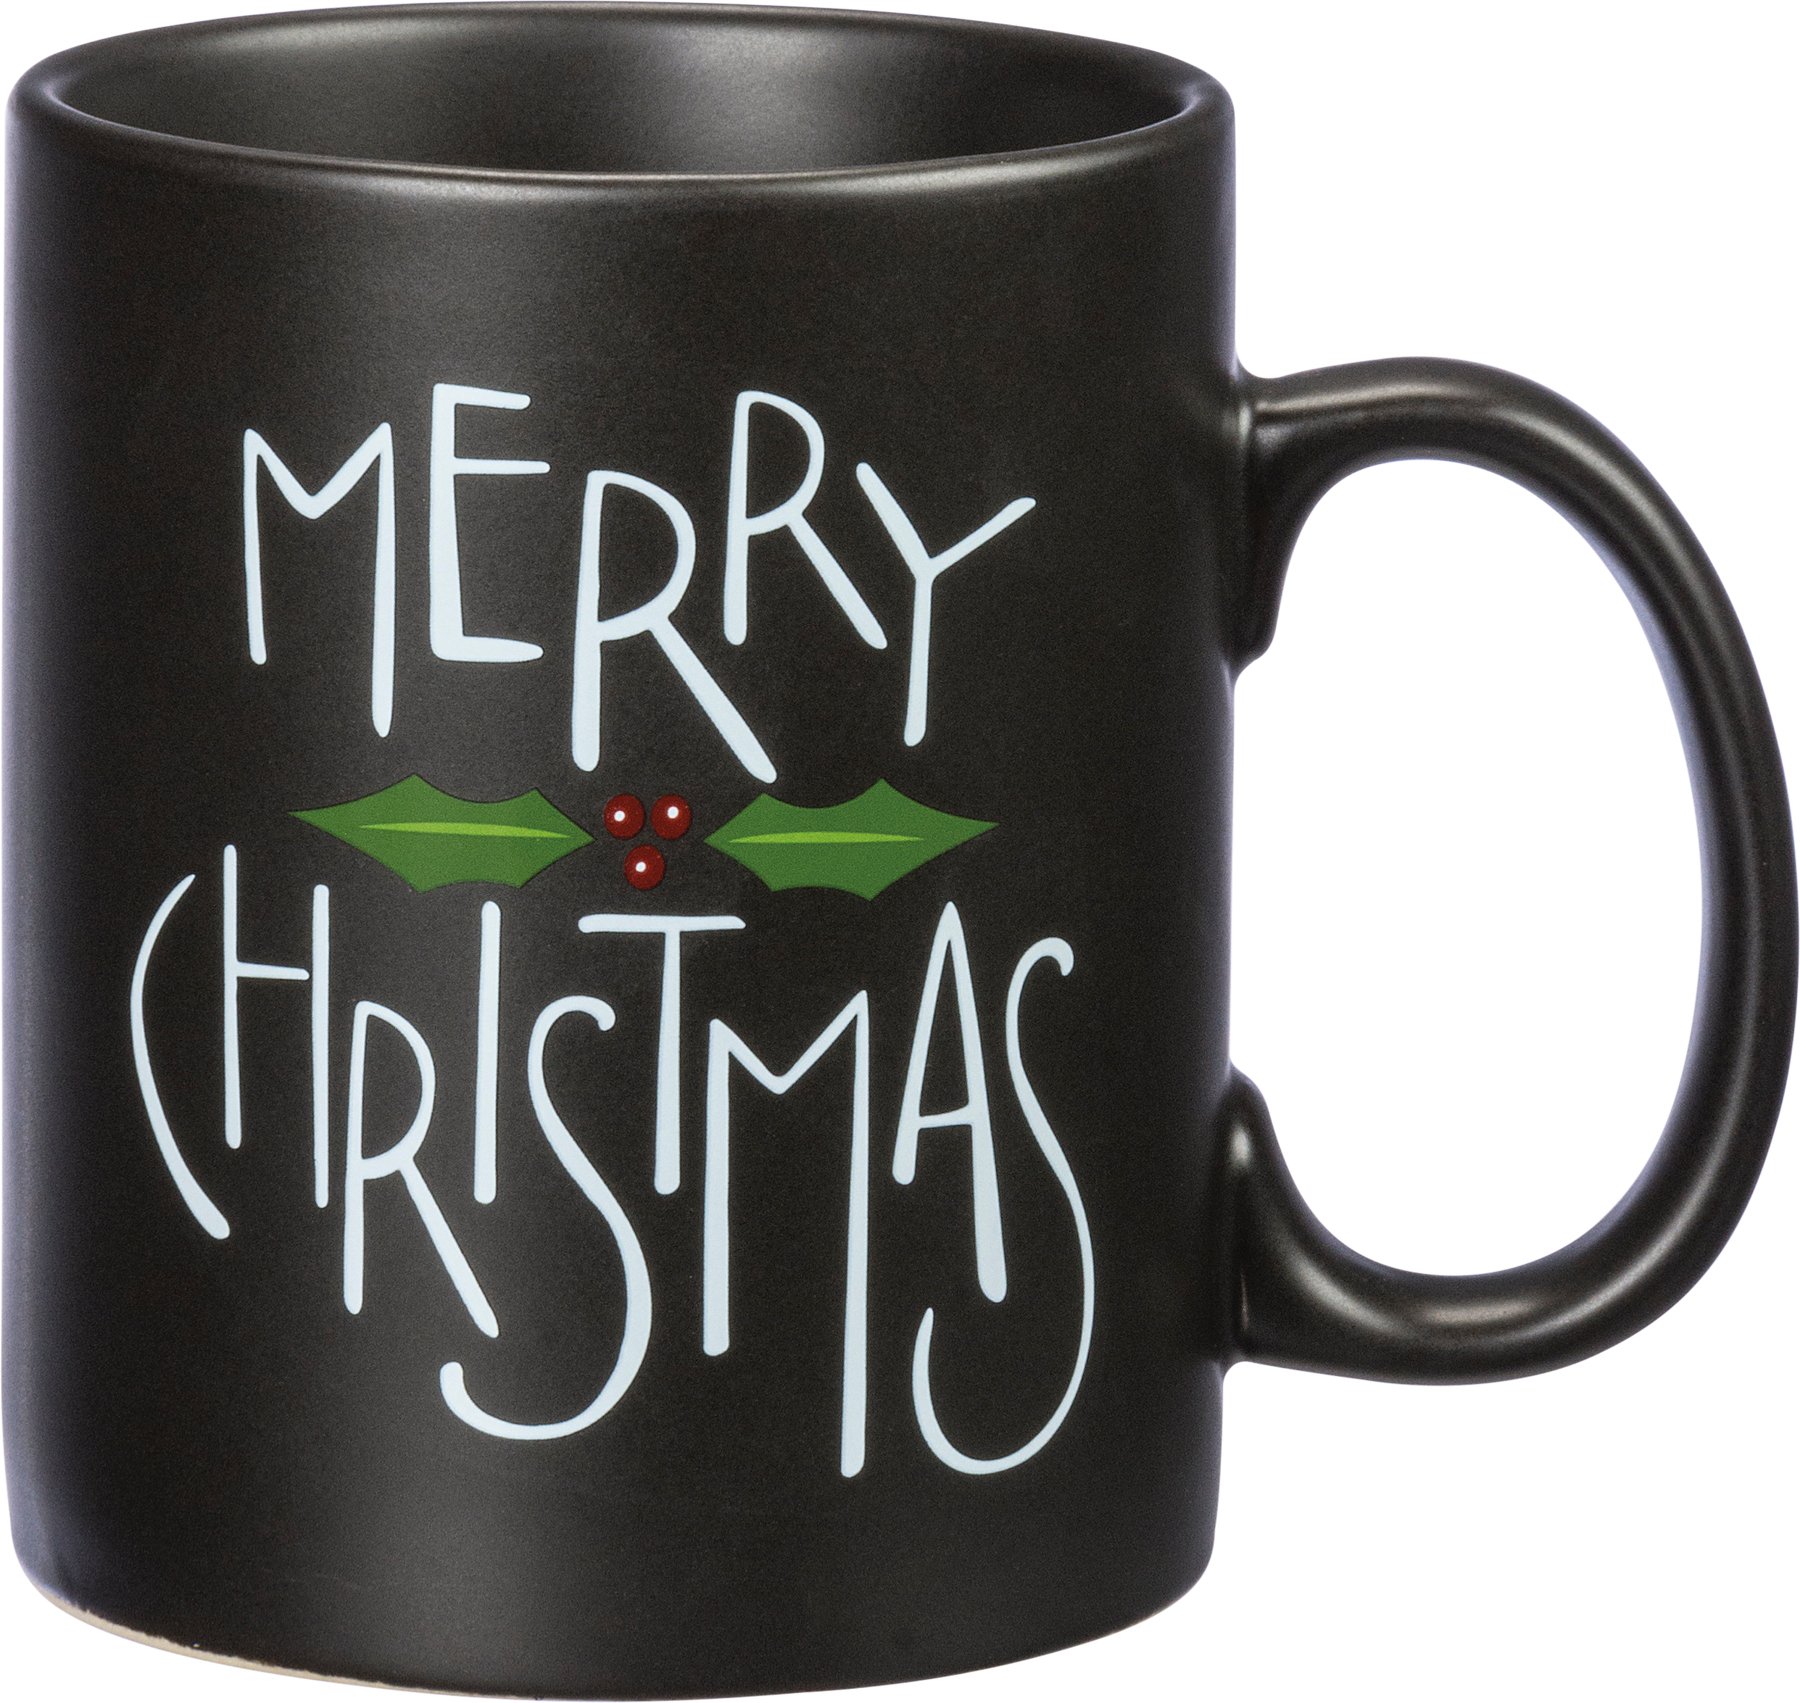 Primitives By Kathy 20 Ounce Merry Christmas/Let It Snow Mug Drinkware 35944